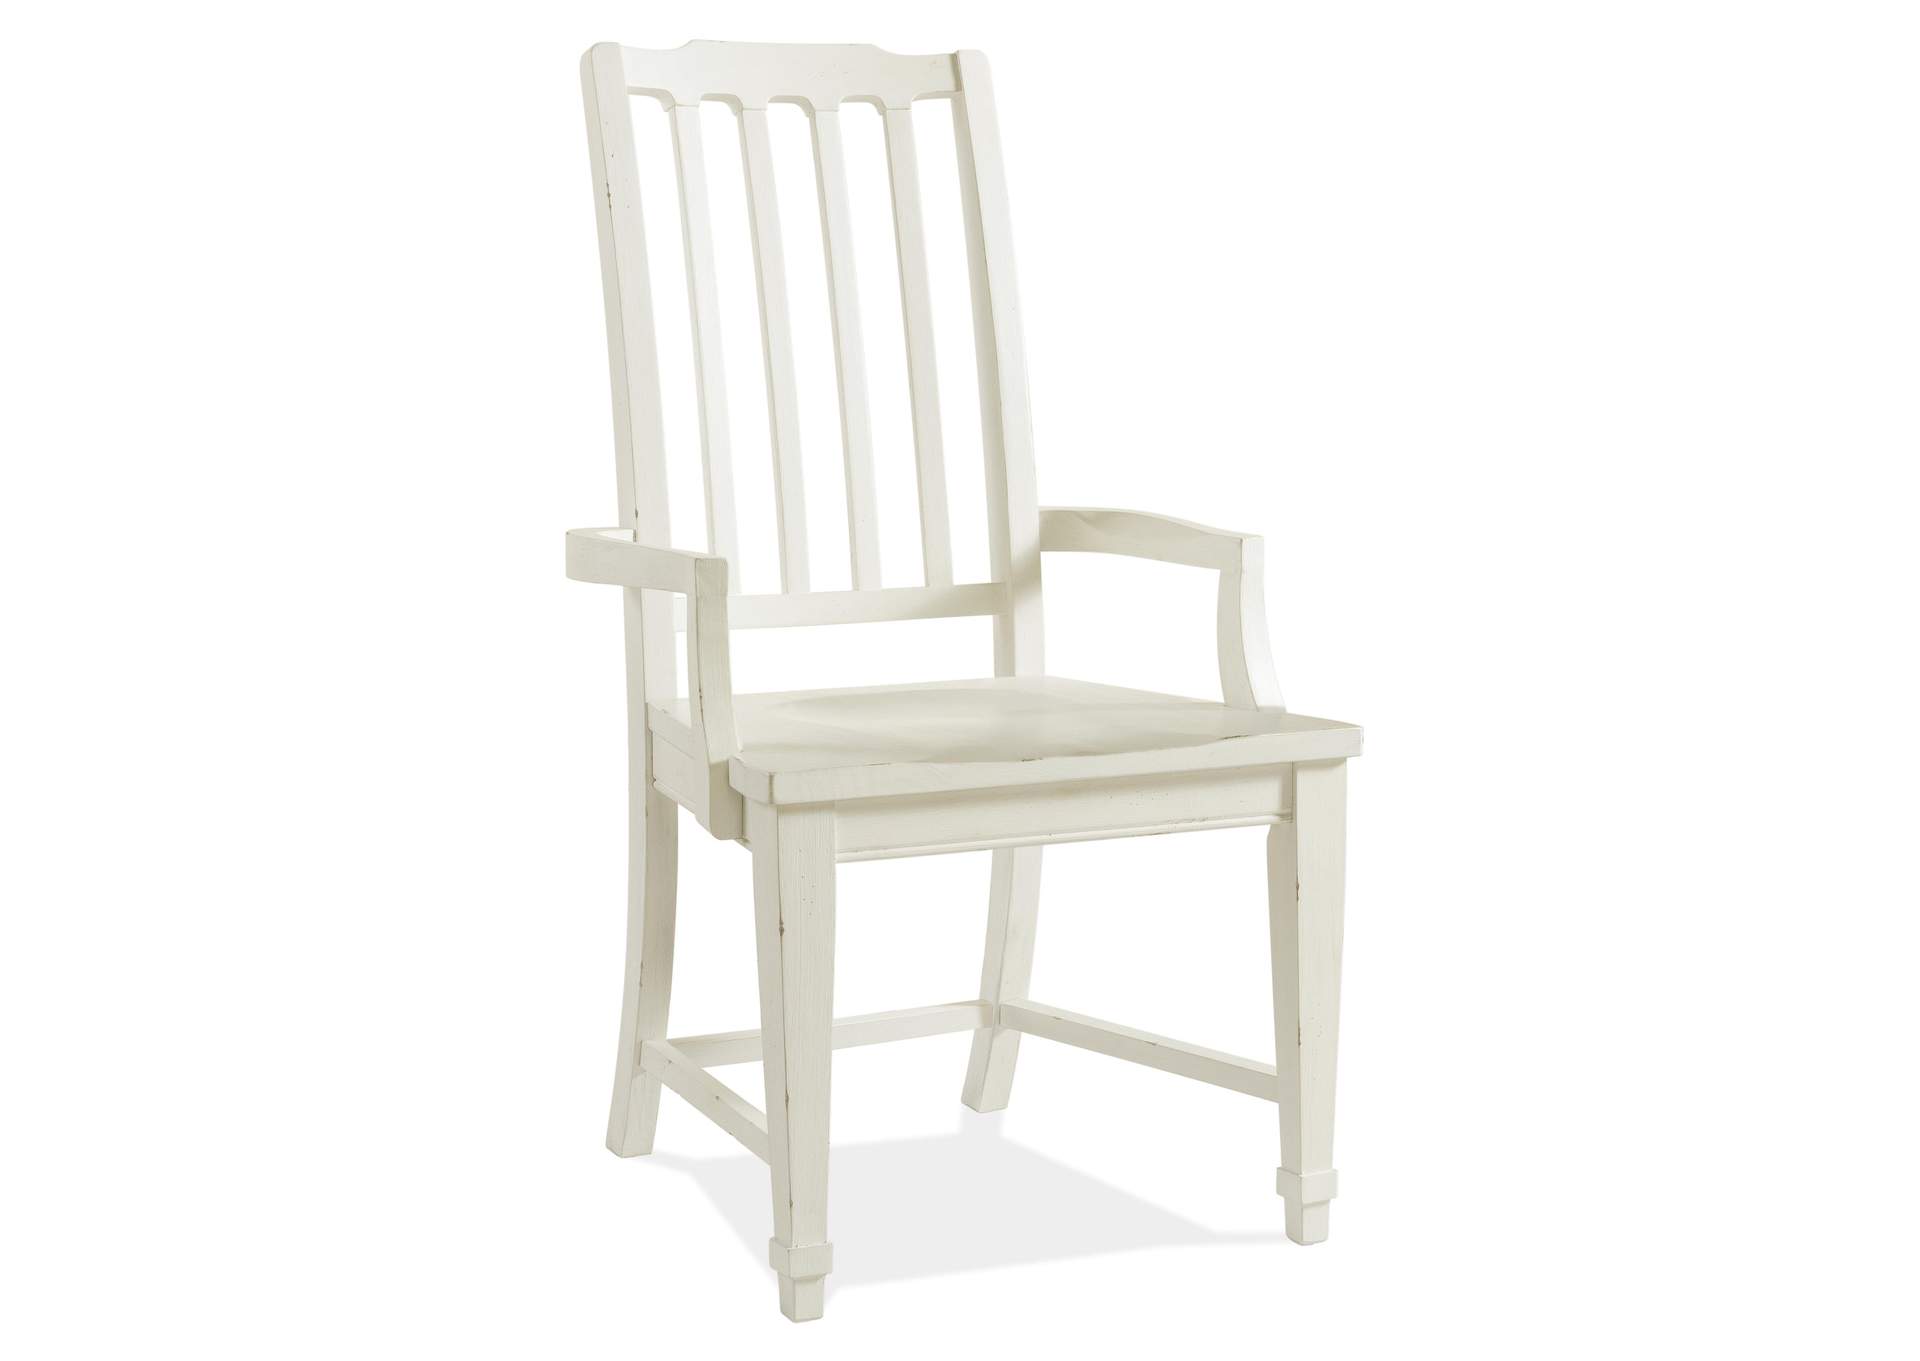 Grand Haven Feathered White Slat-Back Wood Arm Chair 2in [Set of 2],Riverside